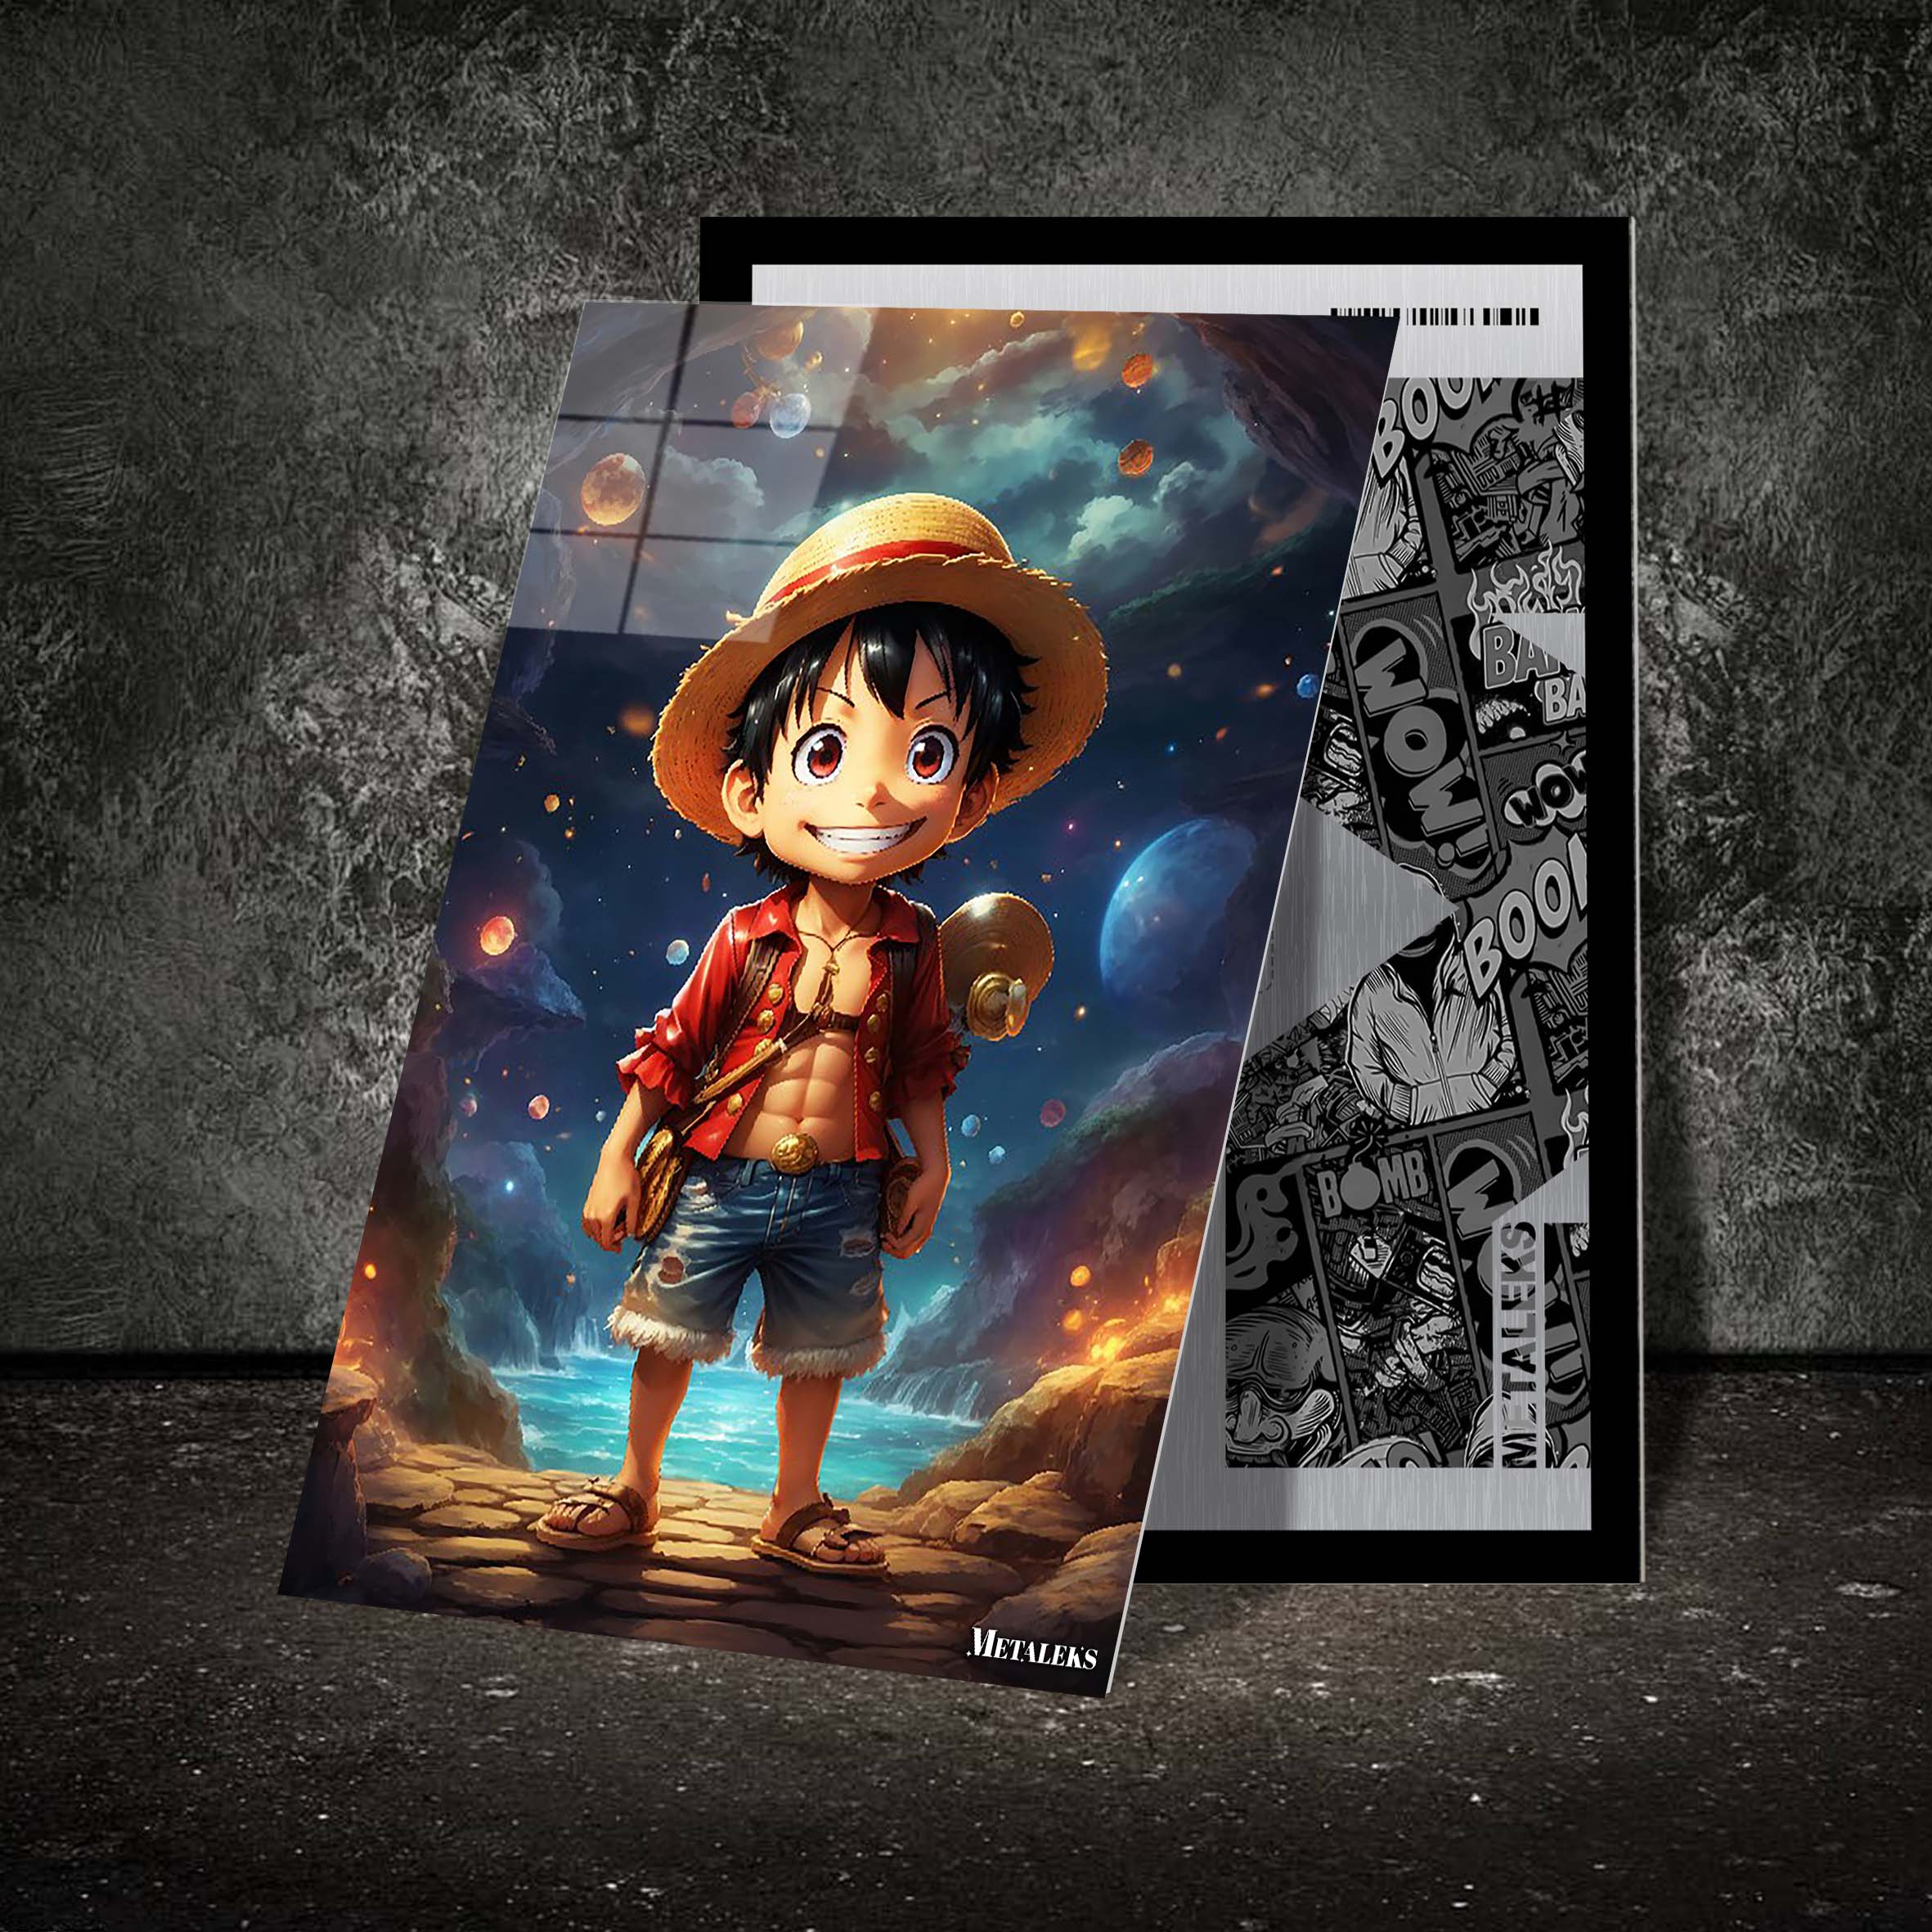 Chibi Monkey D Luffy-designed by @Boogets